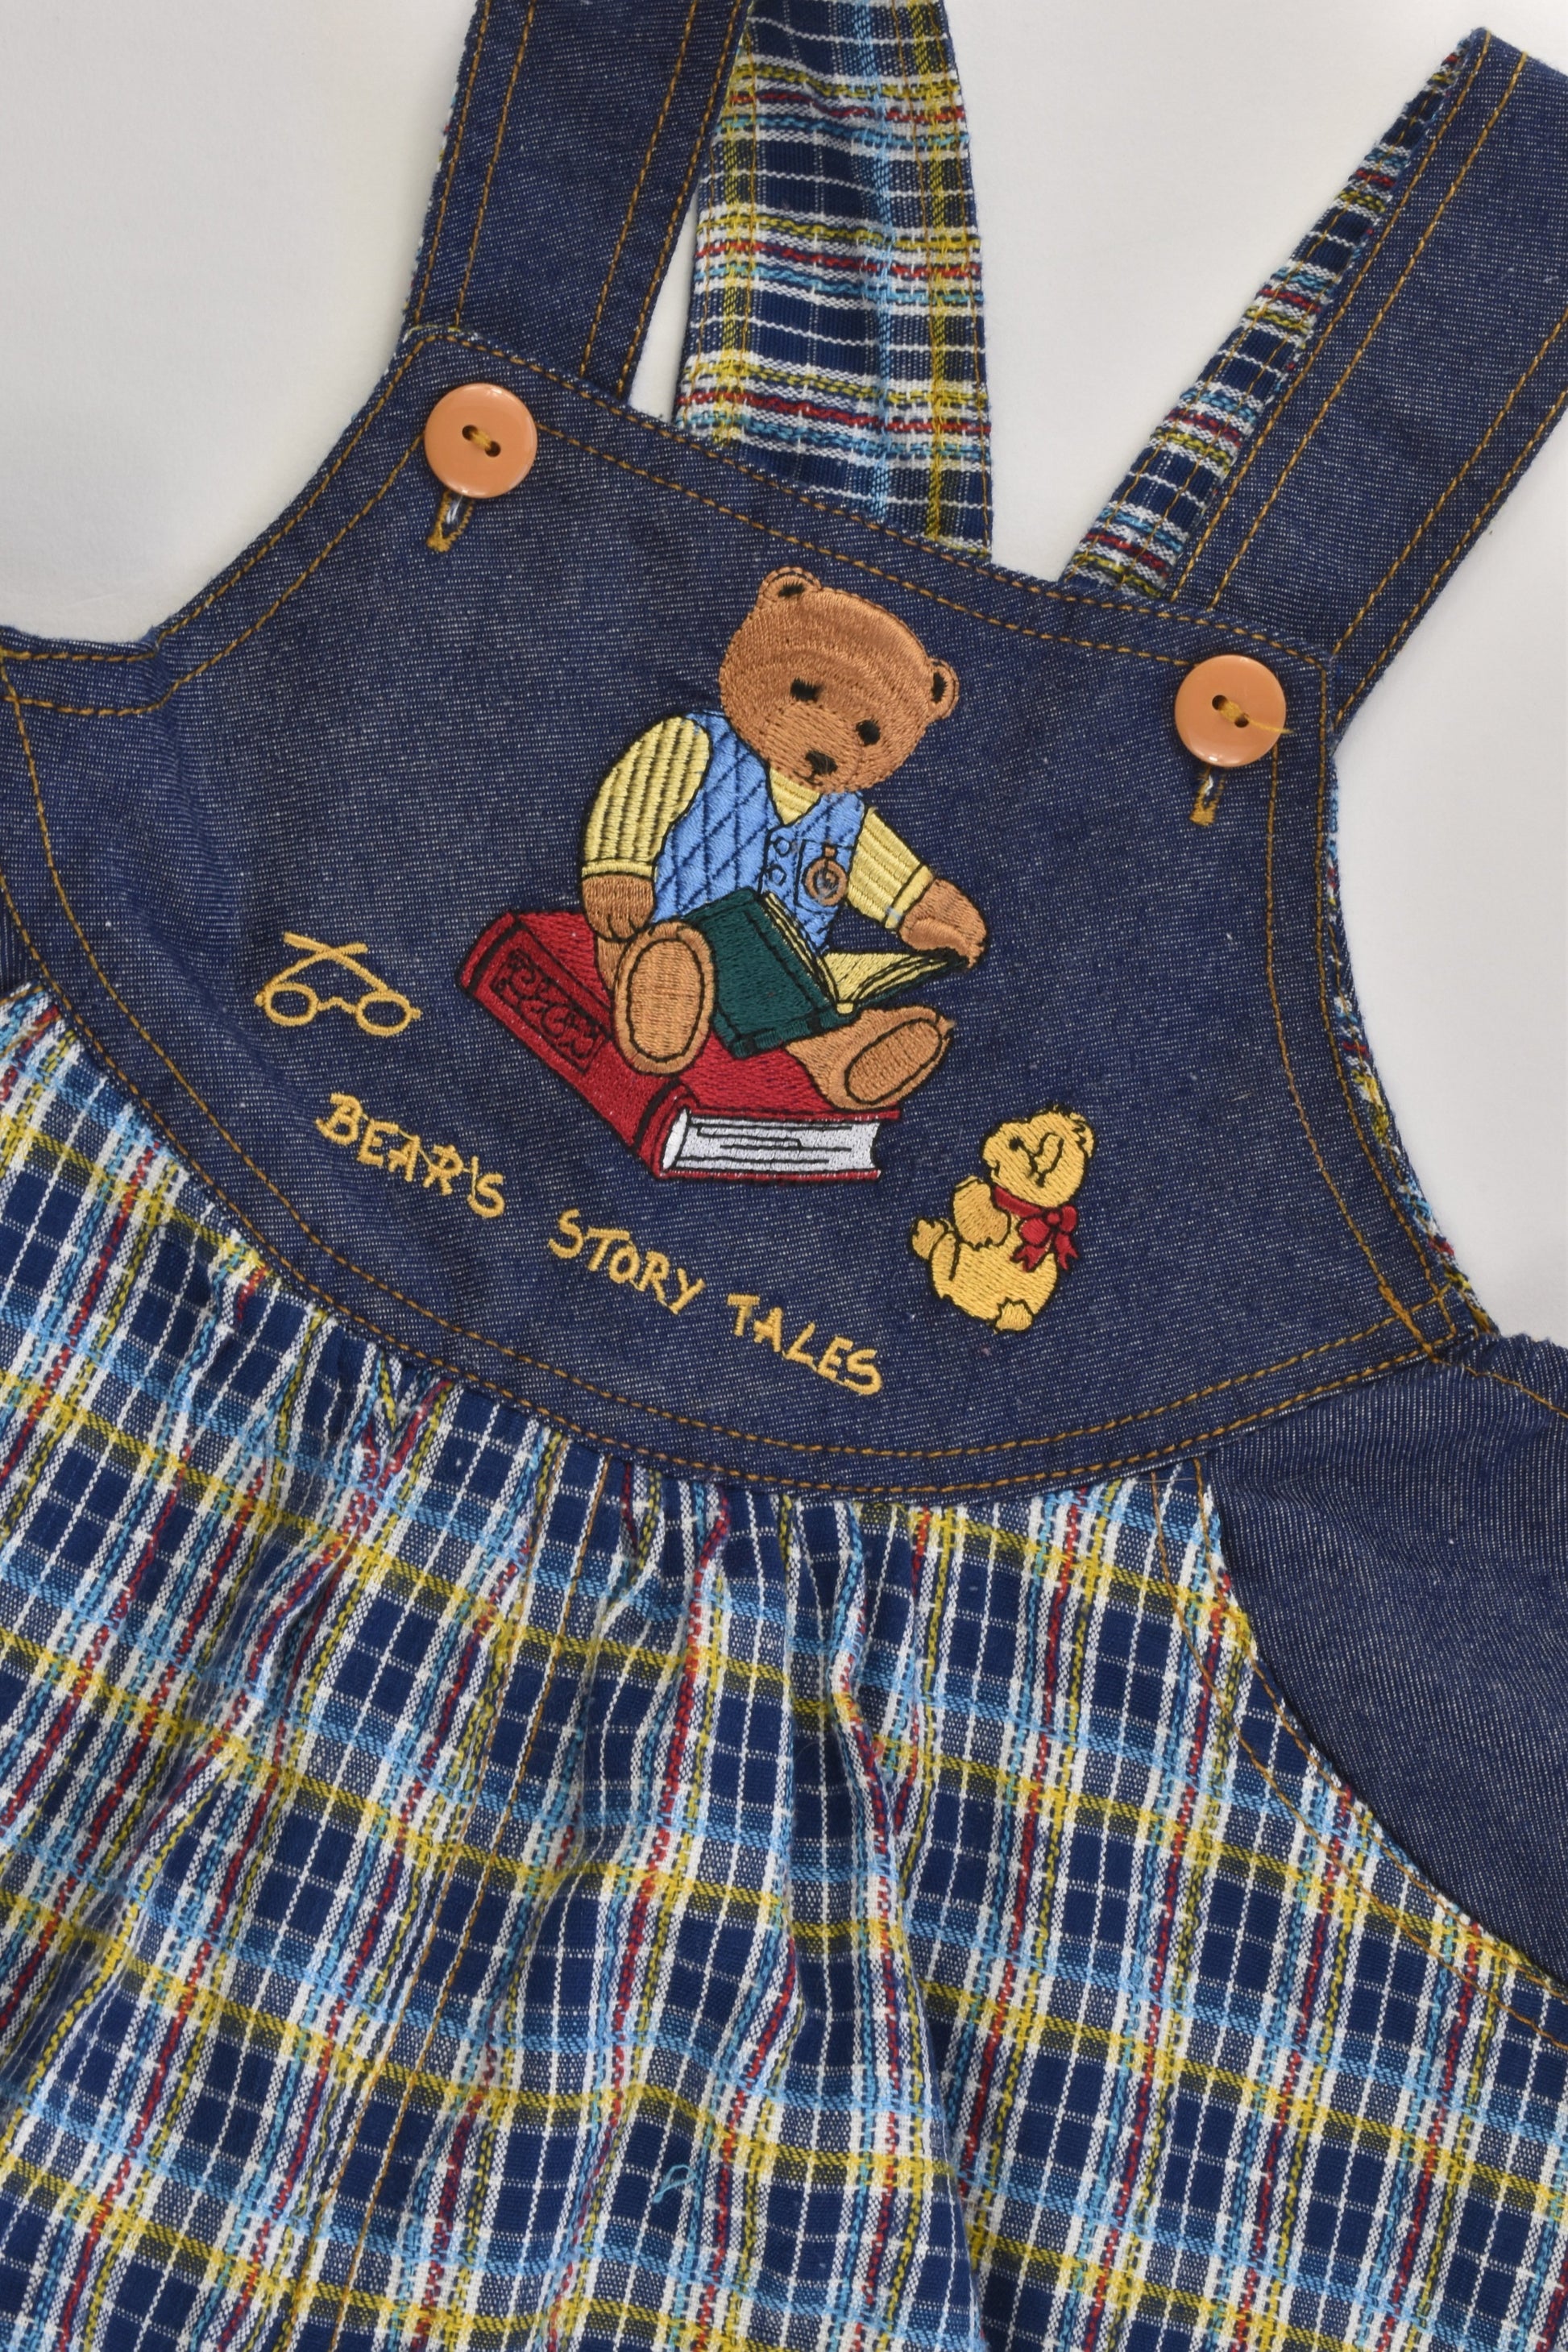 Jelly Beans Size 0 Vintage 'Bear's Story Tales' Short Overalls